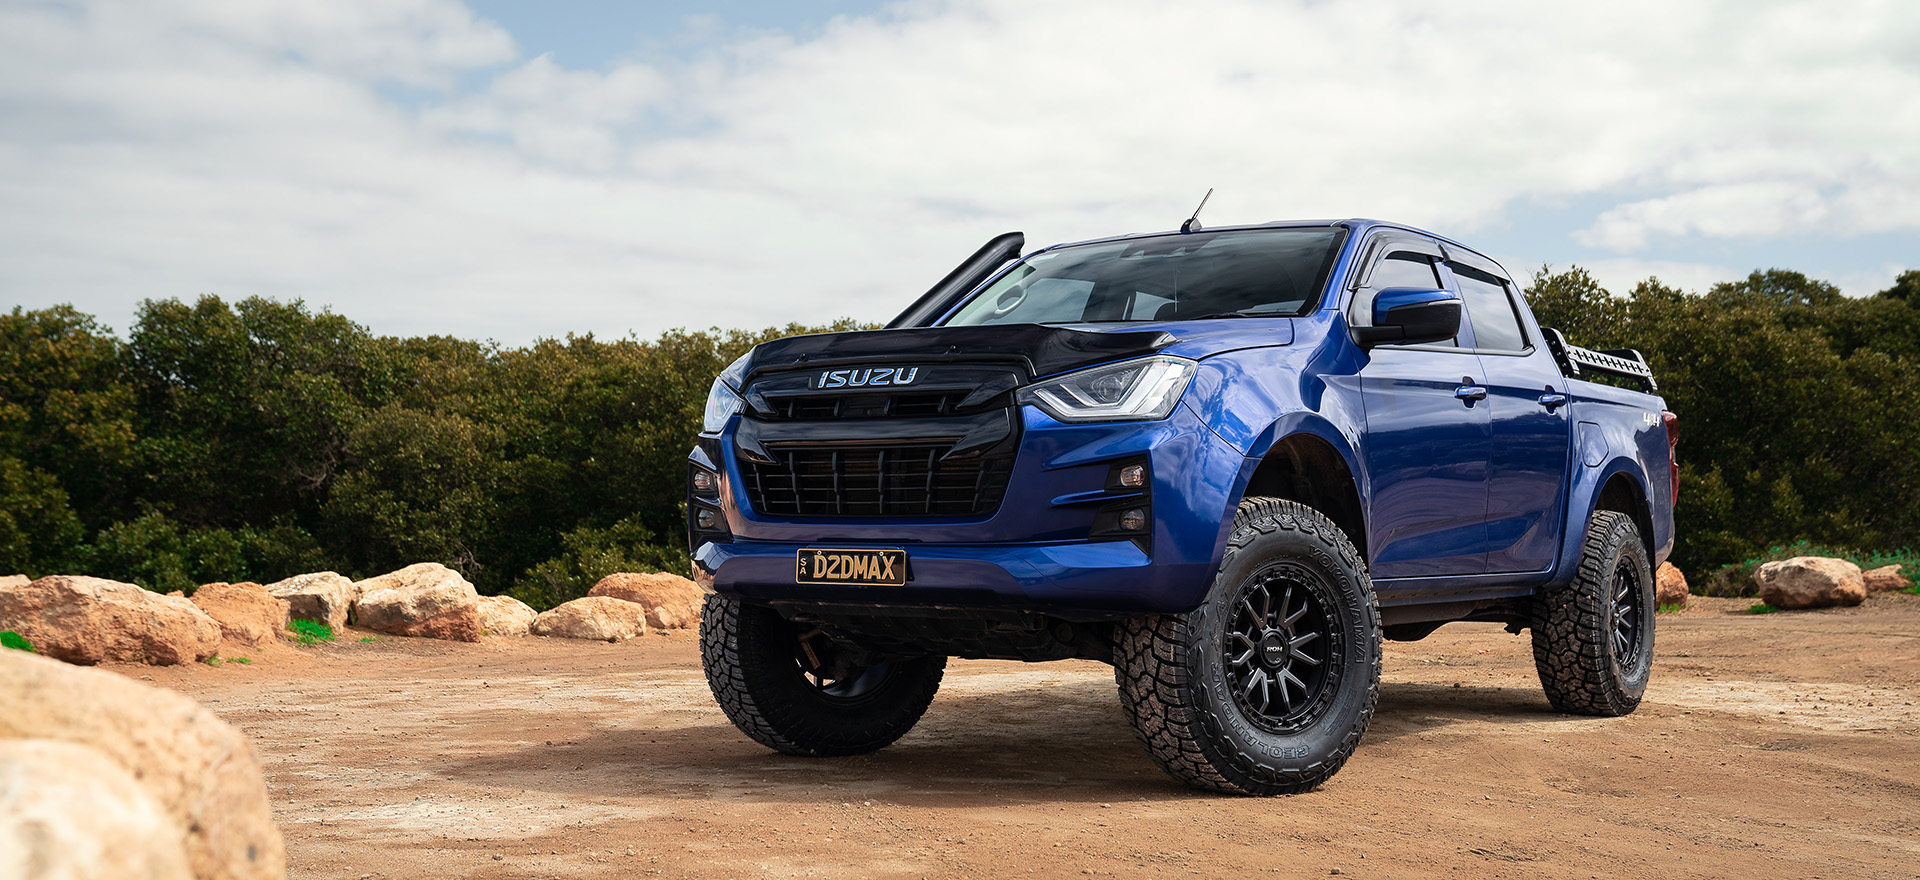 Raid wheels on blue hero Isuzu D-Max in front of rocks with mangroves